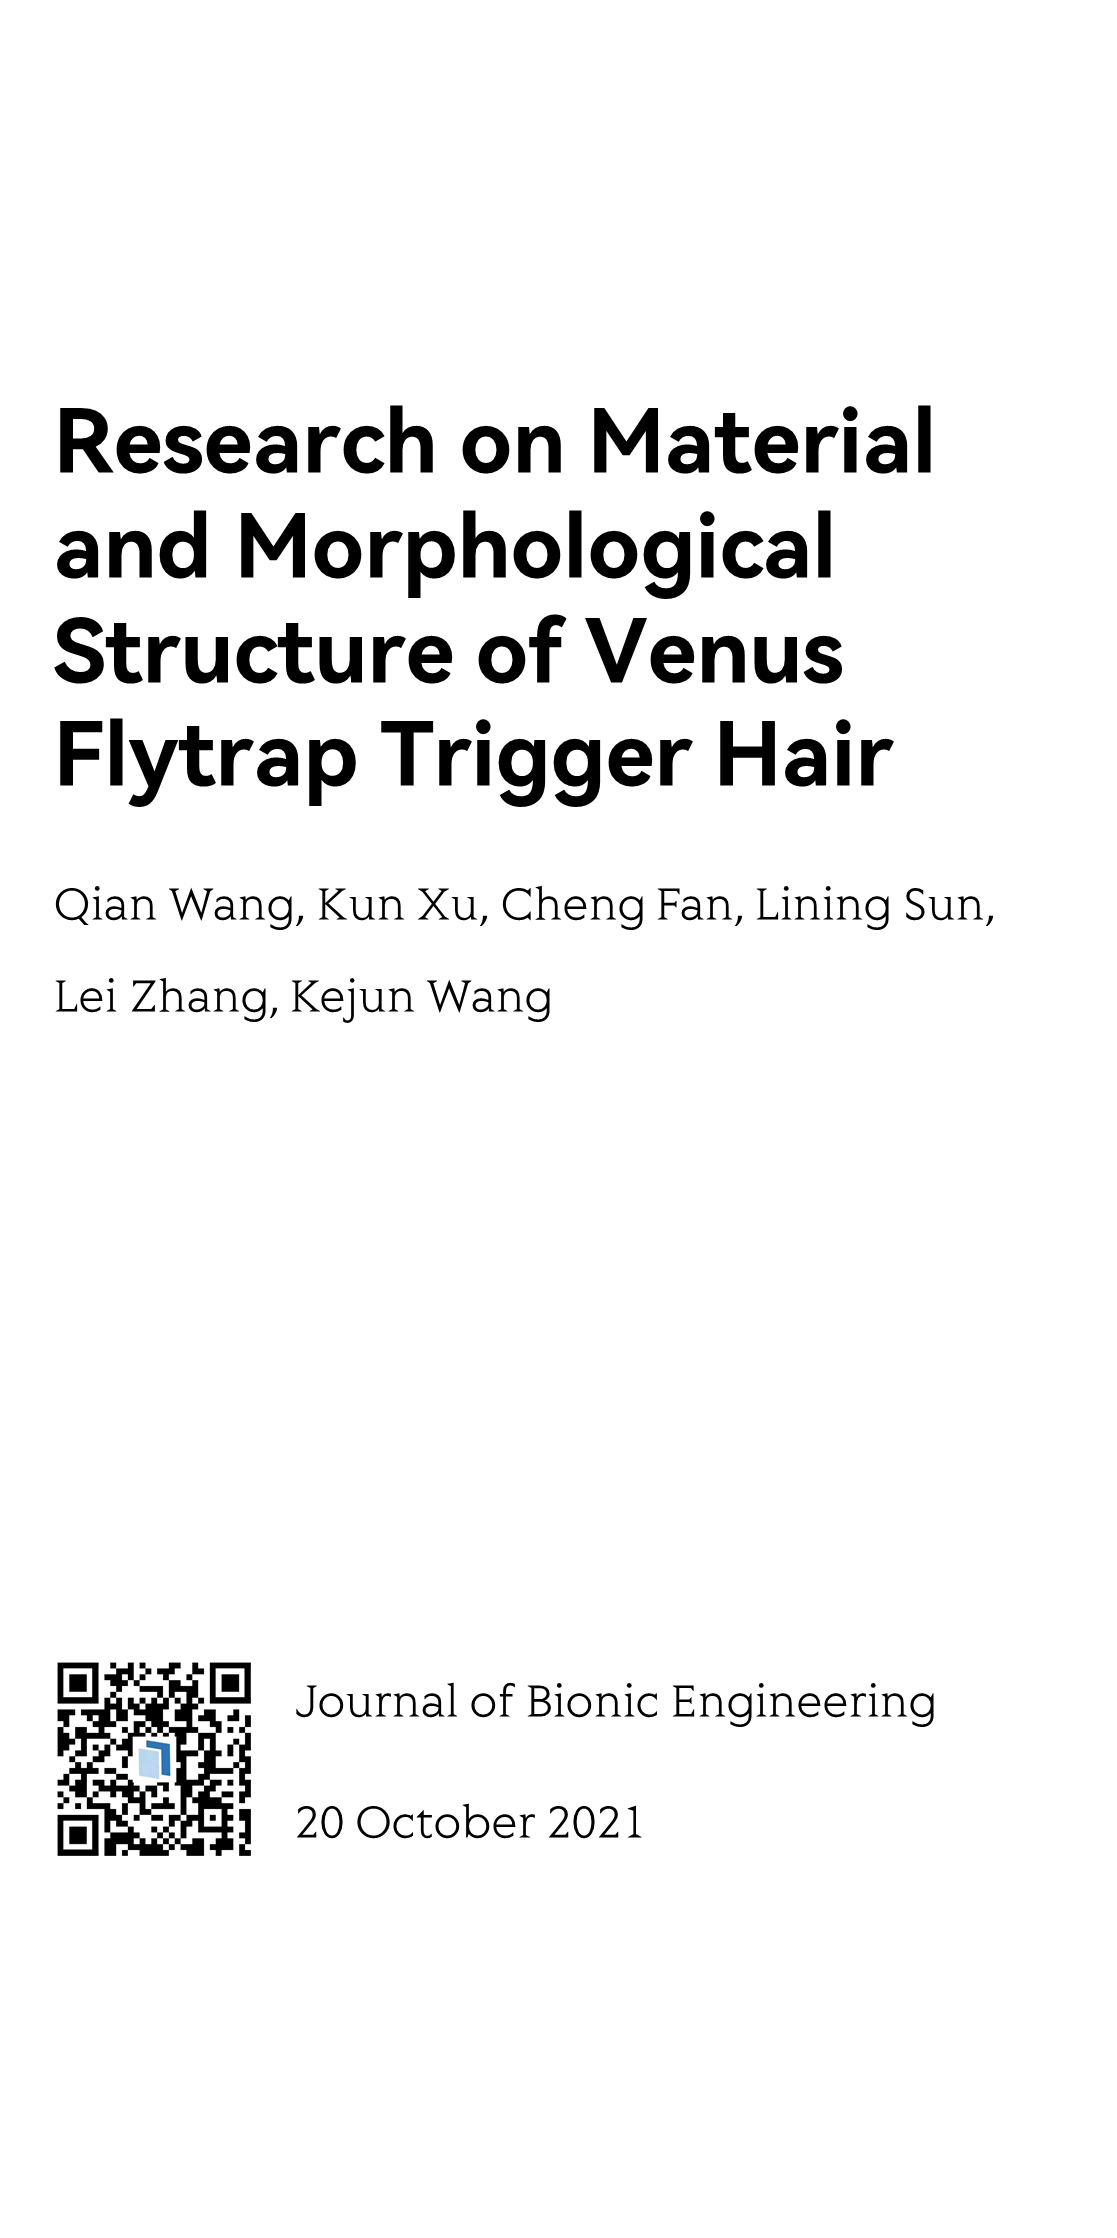 Research on Material and Morphological Structure of Venus Flytrap Trigger Hair_1